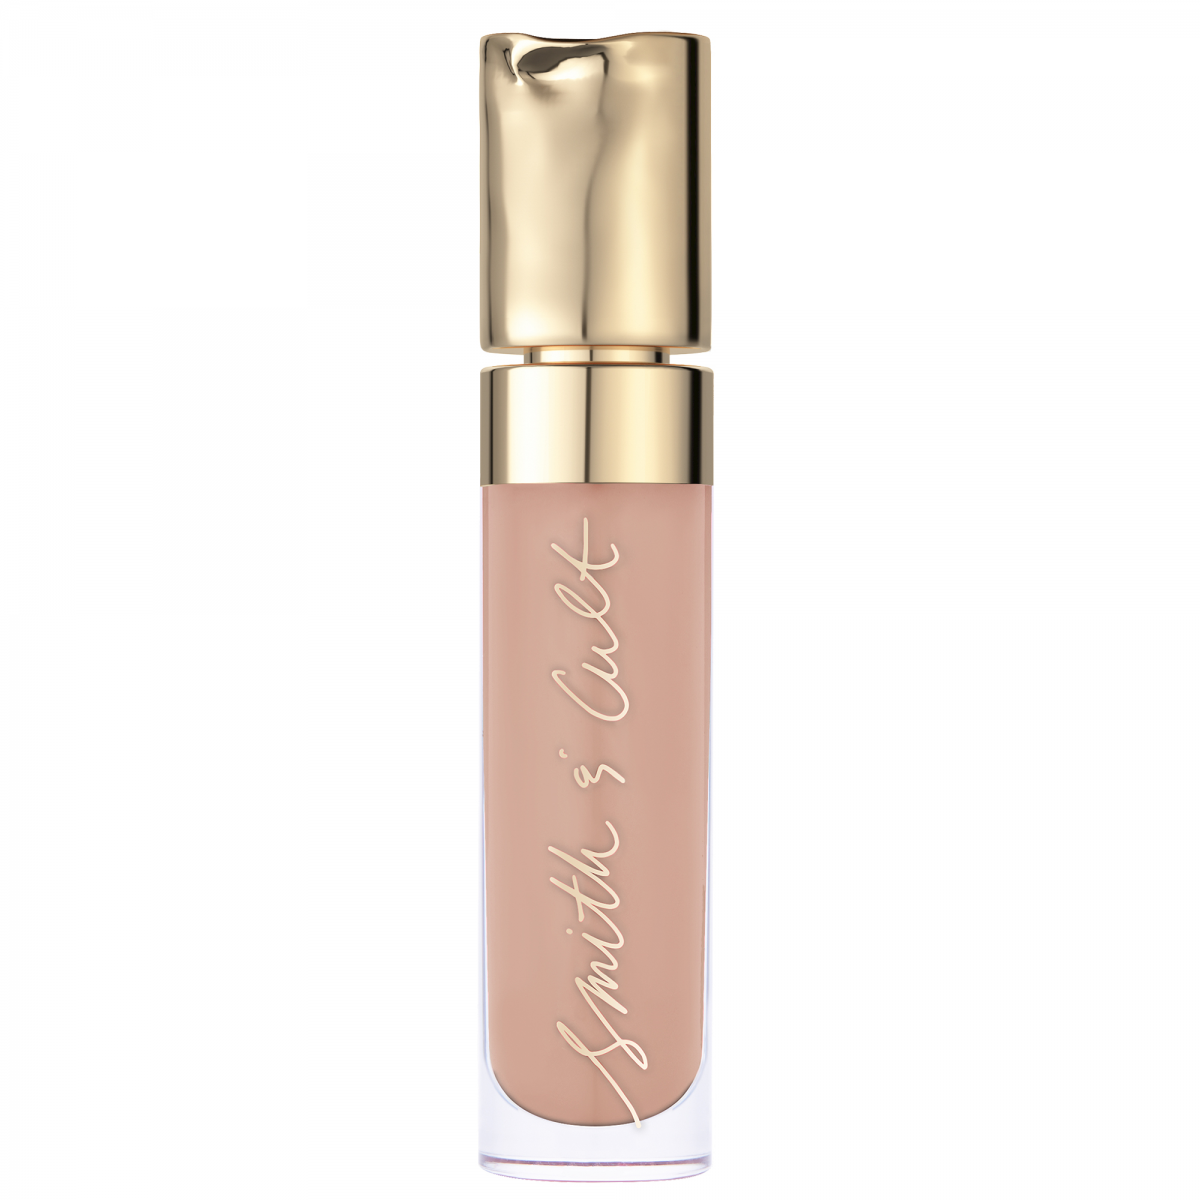 Smith & Cult The Shining Lip Lacquer - Milk For Honey 5ml - Hairsale.se